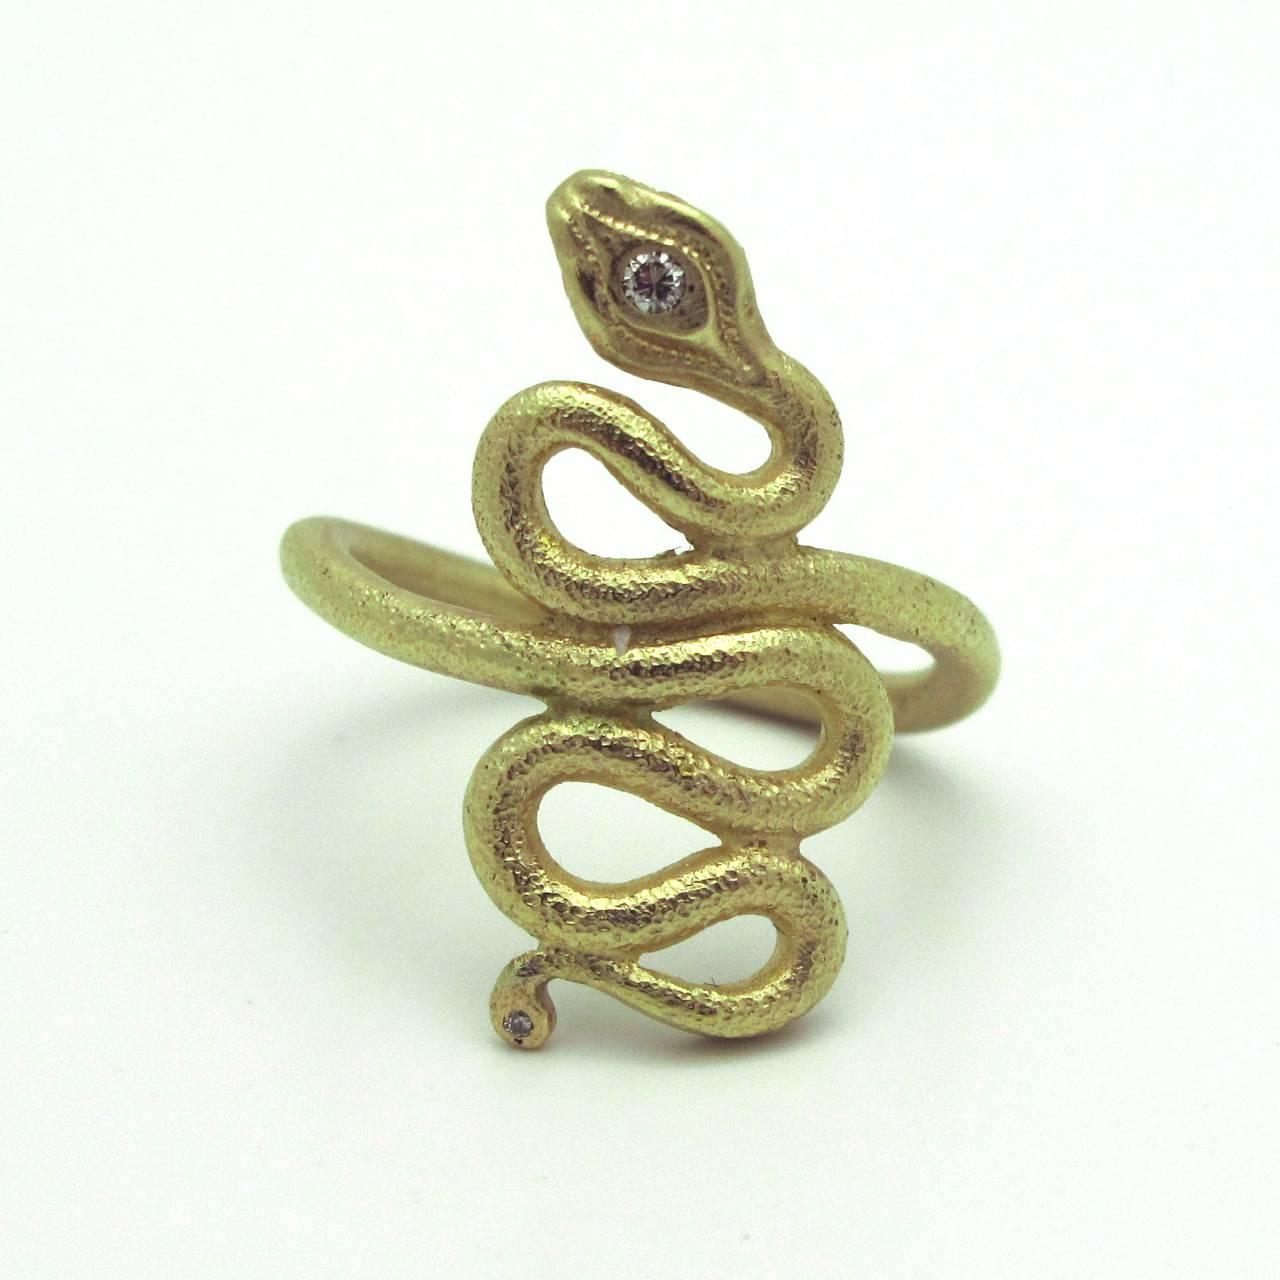 This stunning 14k Gold Snake Ring with diamond head is a classic and modern beautifully designed snake. It has a delicate reptilian texture that gives it a natural look . The head is accented with one rose cut diamond.